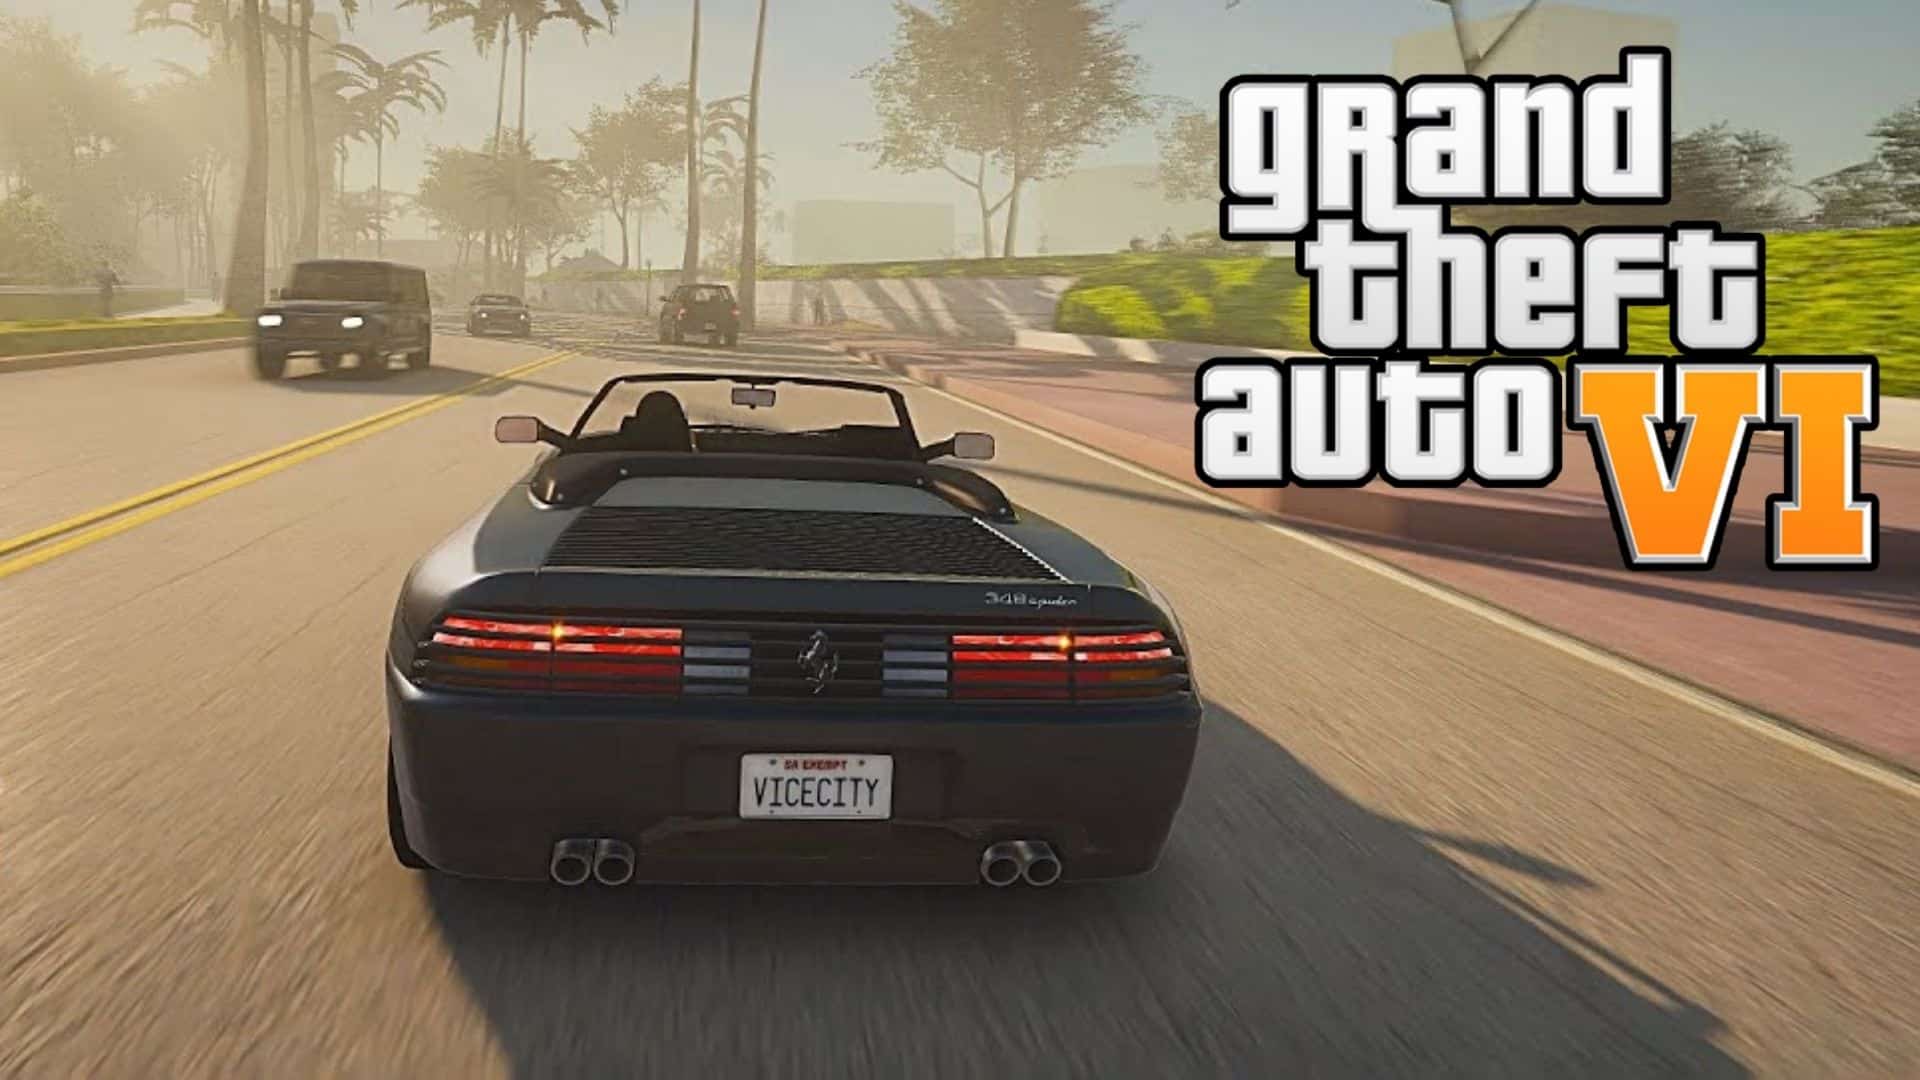 GTA 5 modded ferrari with player driving around Vice City